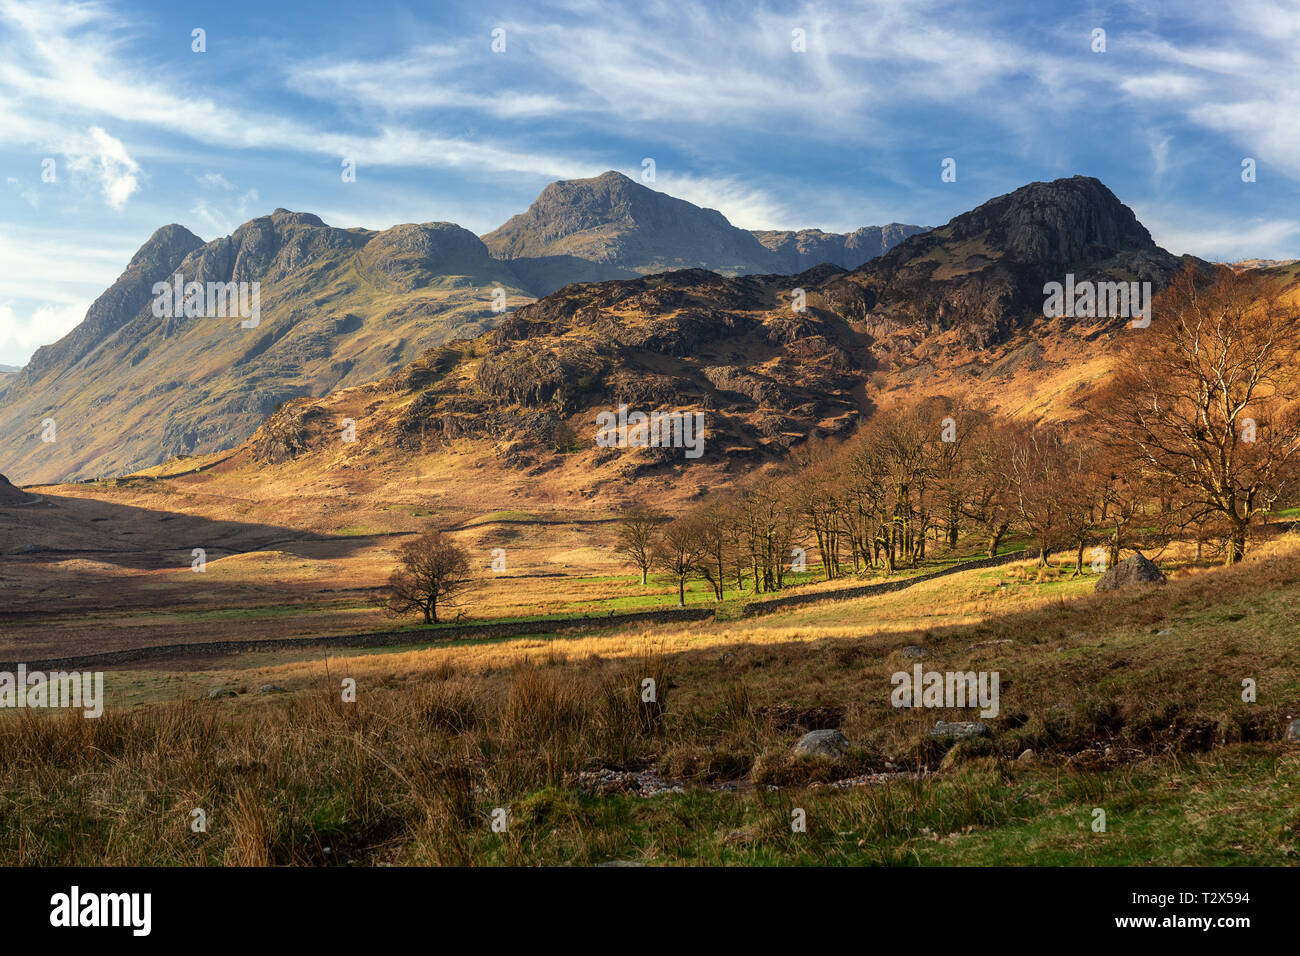 Langdale Pikes is one of many beautiful destinations in the English Lake District and particularly popular with fell walkers and climbers. Stock Photo